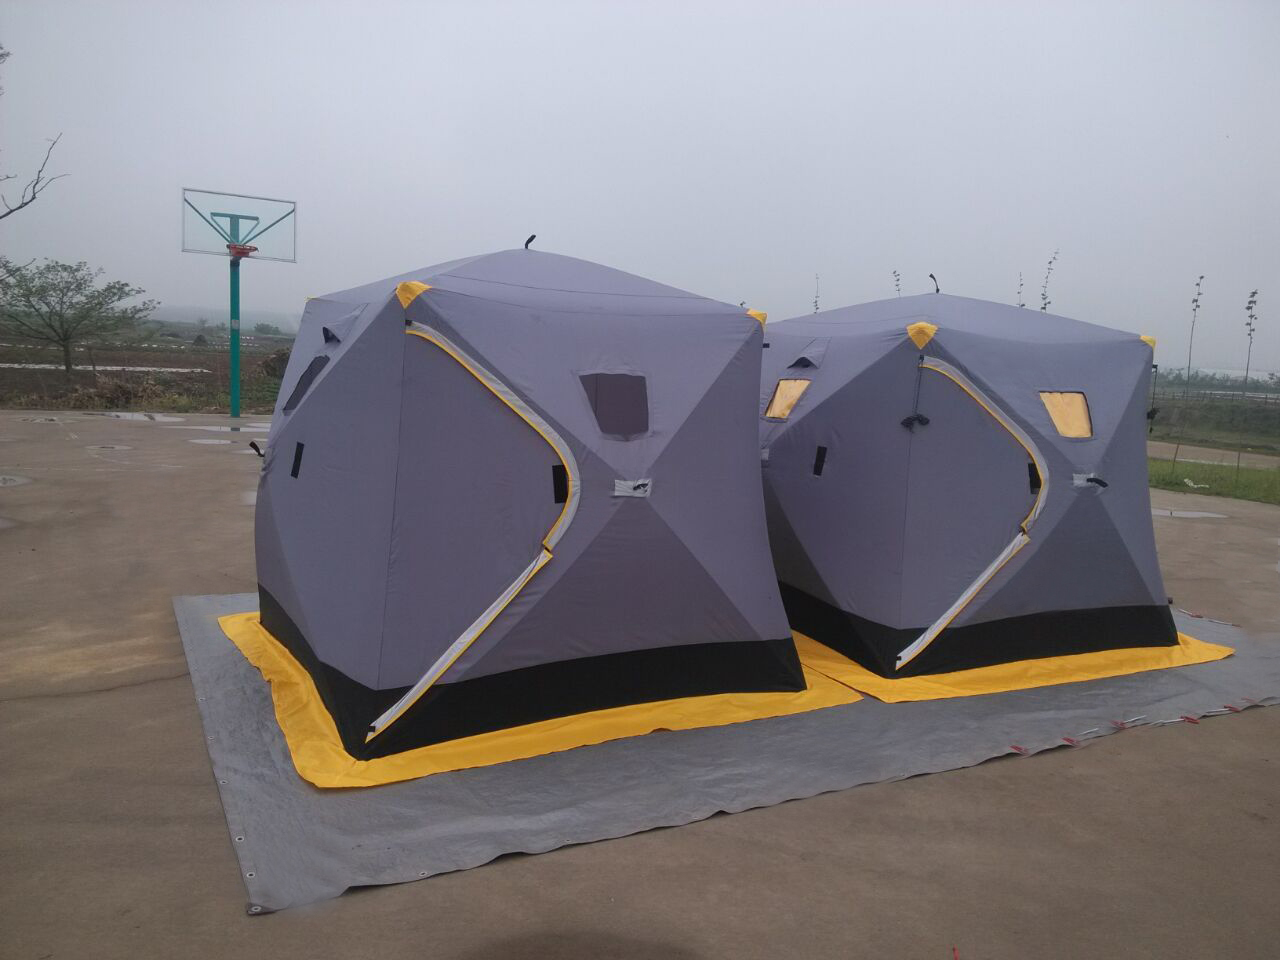 Thermal Layer Pop Up Ice Fishing Tent Fishing Shelter